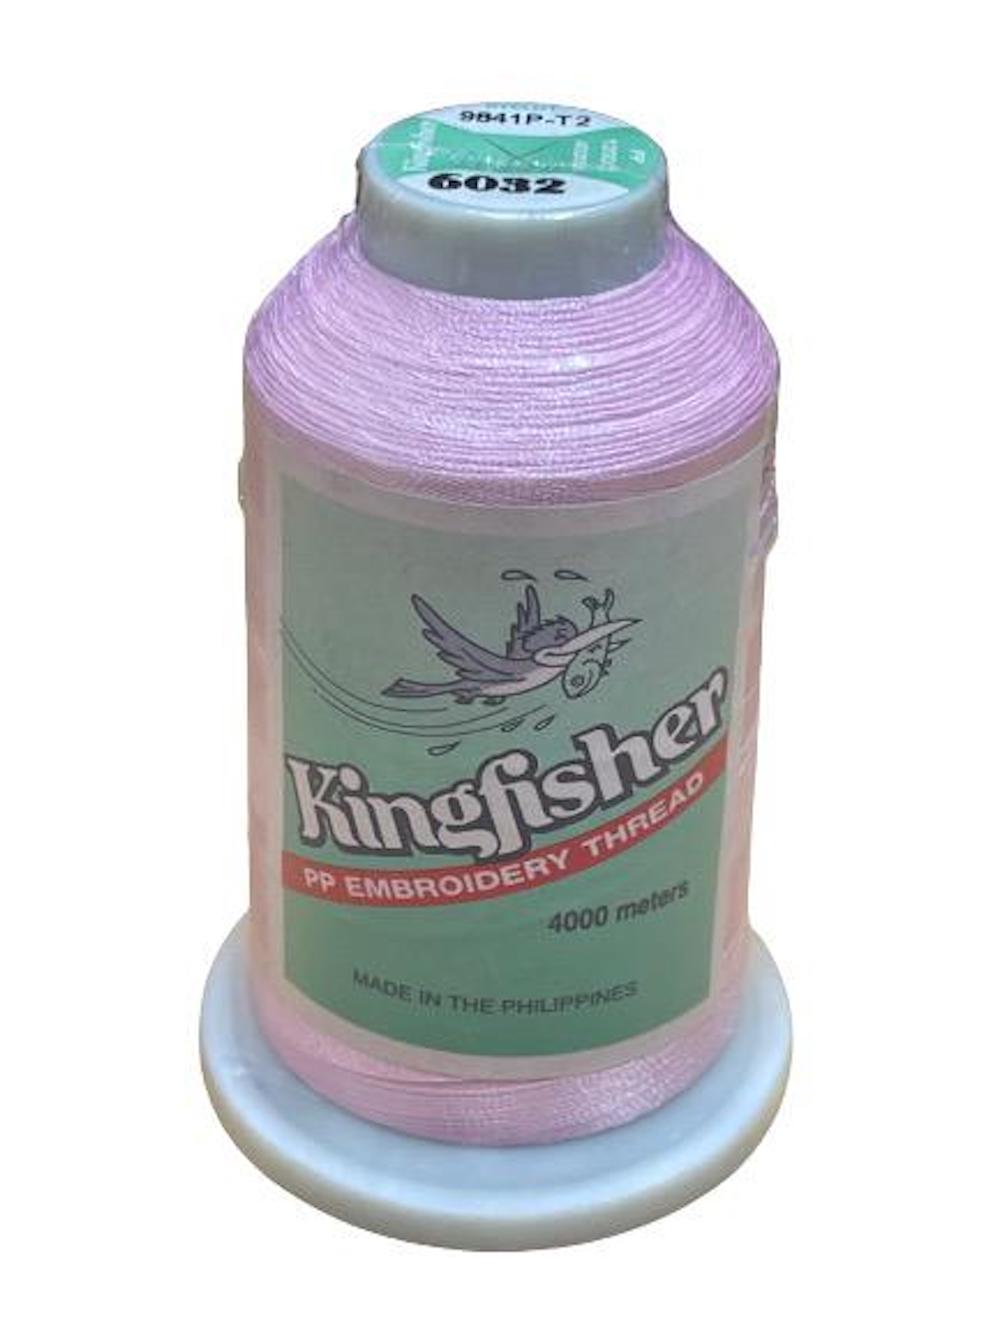 King Fisher Embroidery Thread 4000m 6032 - MY SEWING MALL